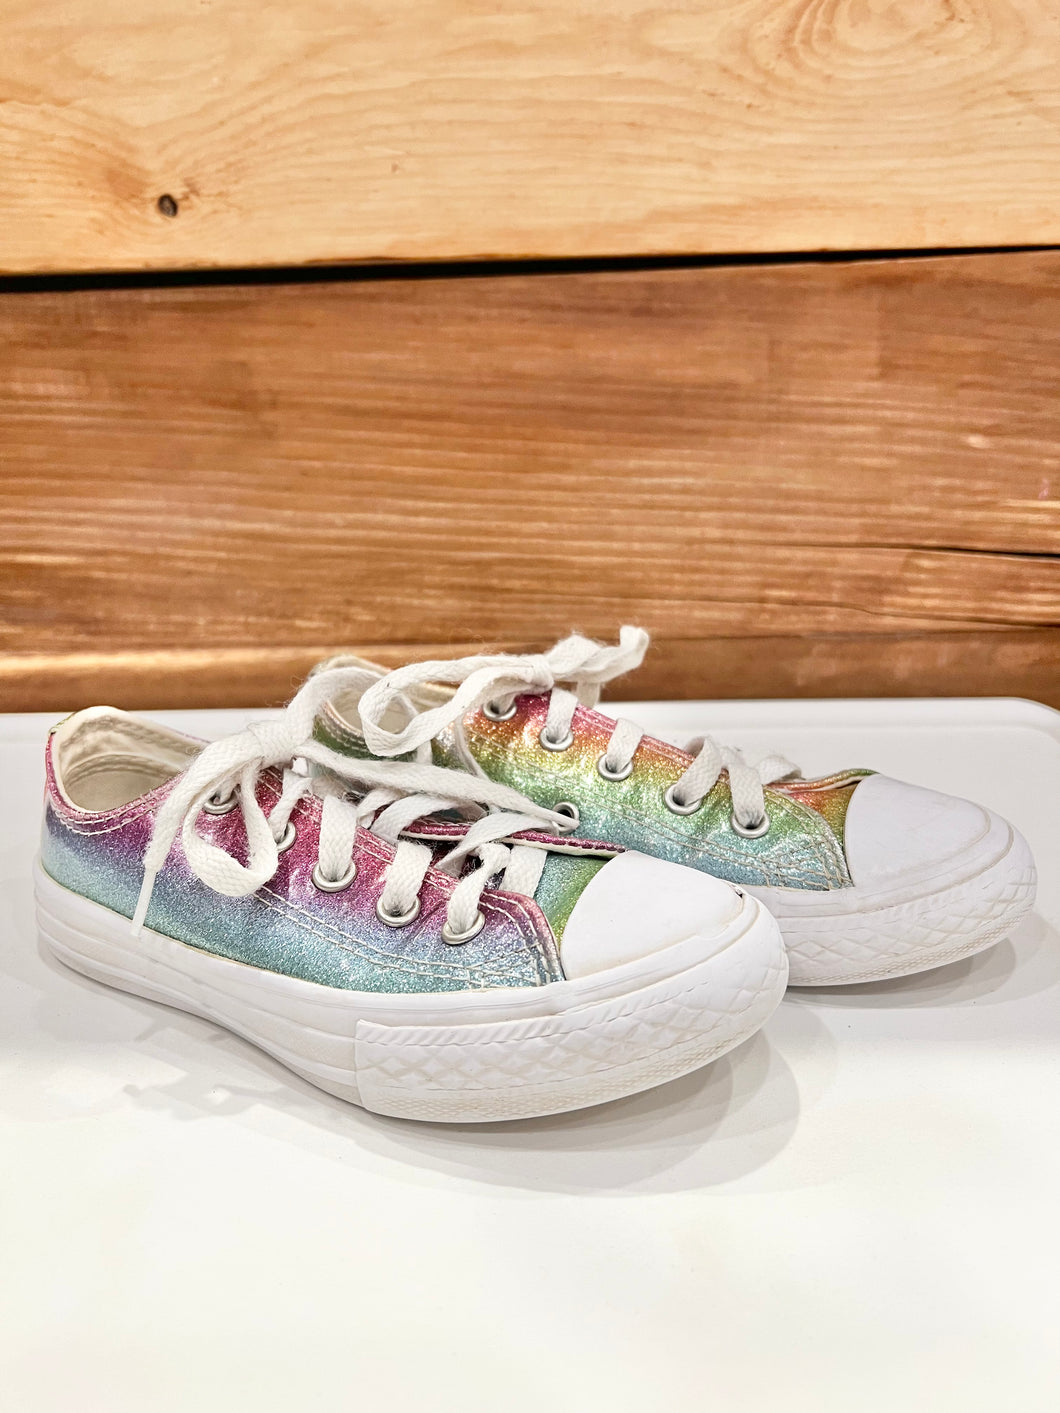 Converse Iridescent Shoes Size 11